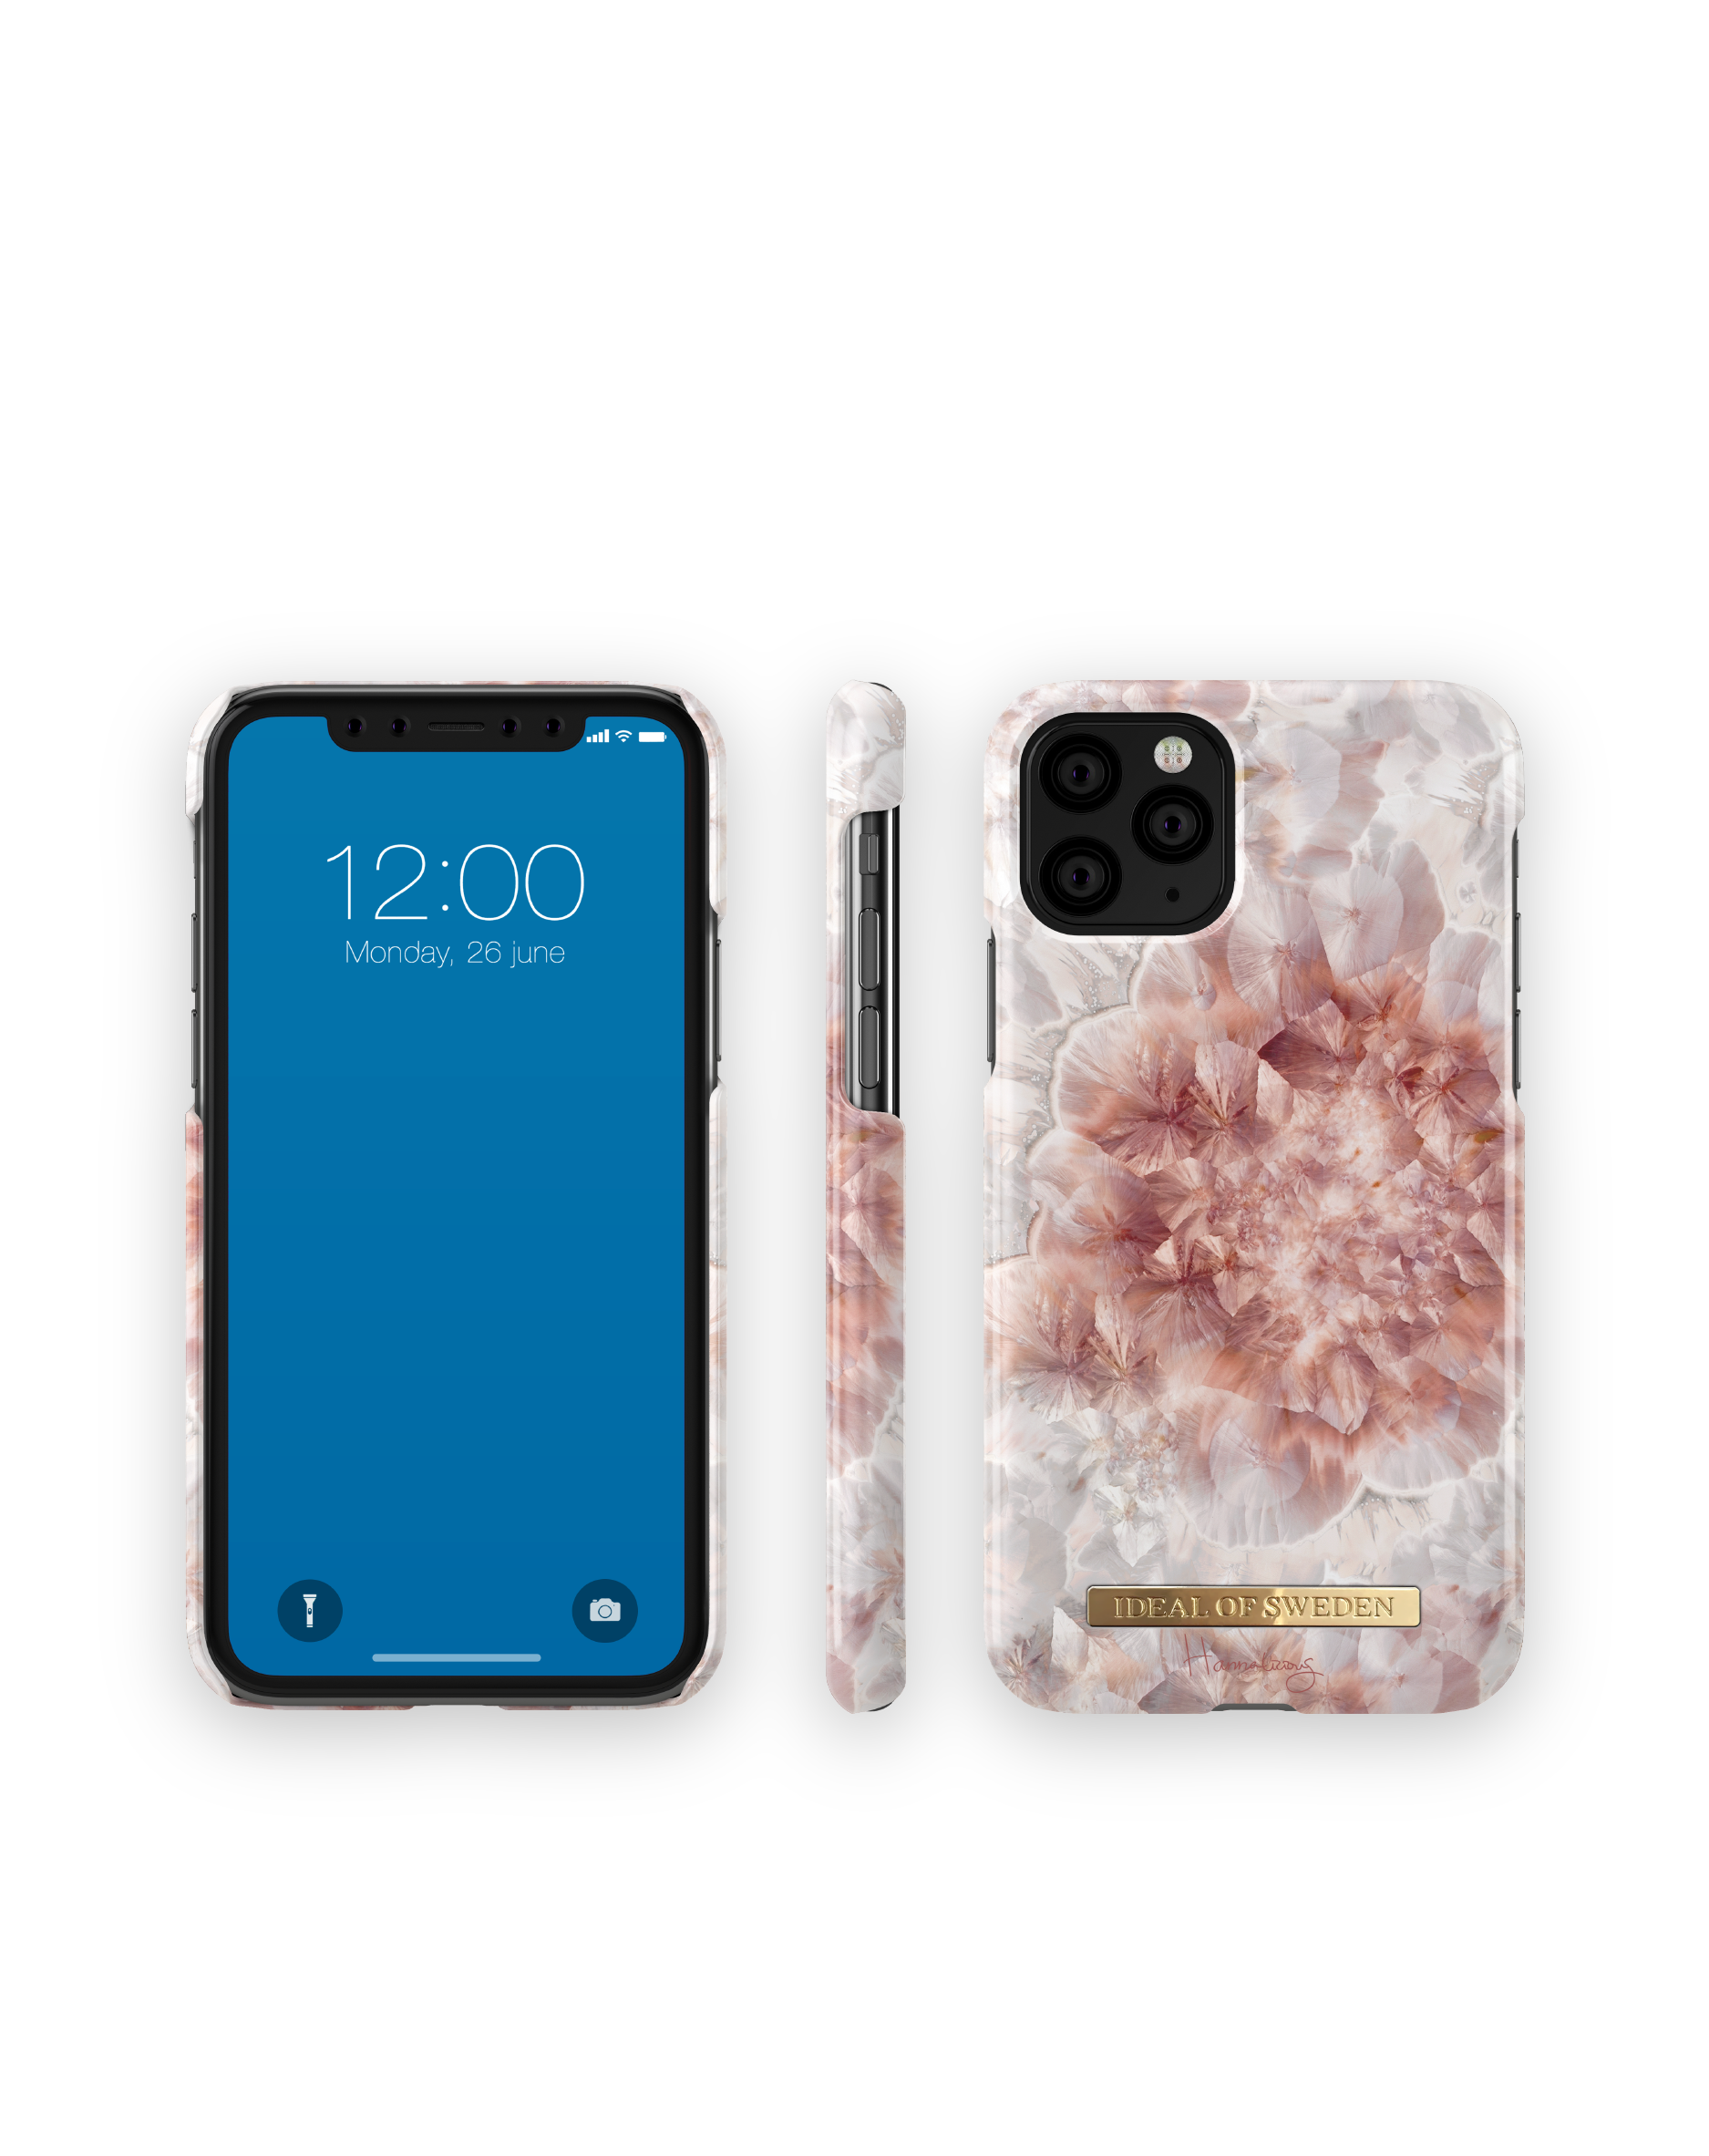 Apple SWEDEN 11 Backcover, iPhone IDEAL OF X, iPhone Quartz Pro, Crystal Apple Apple iPhone XS, Roze IDFCH2-I1958-126, Apple,